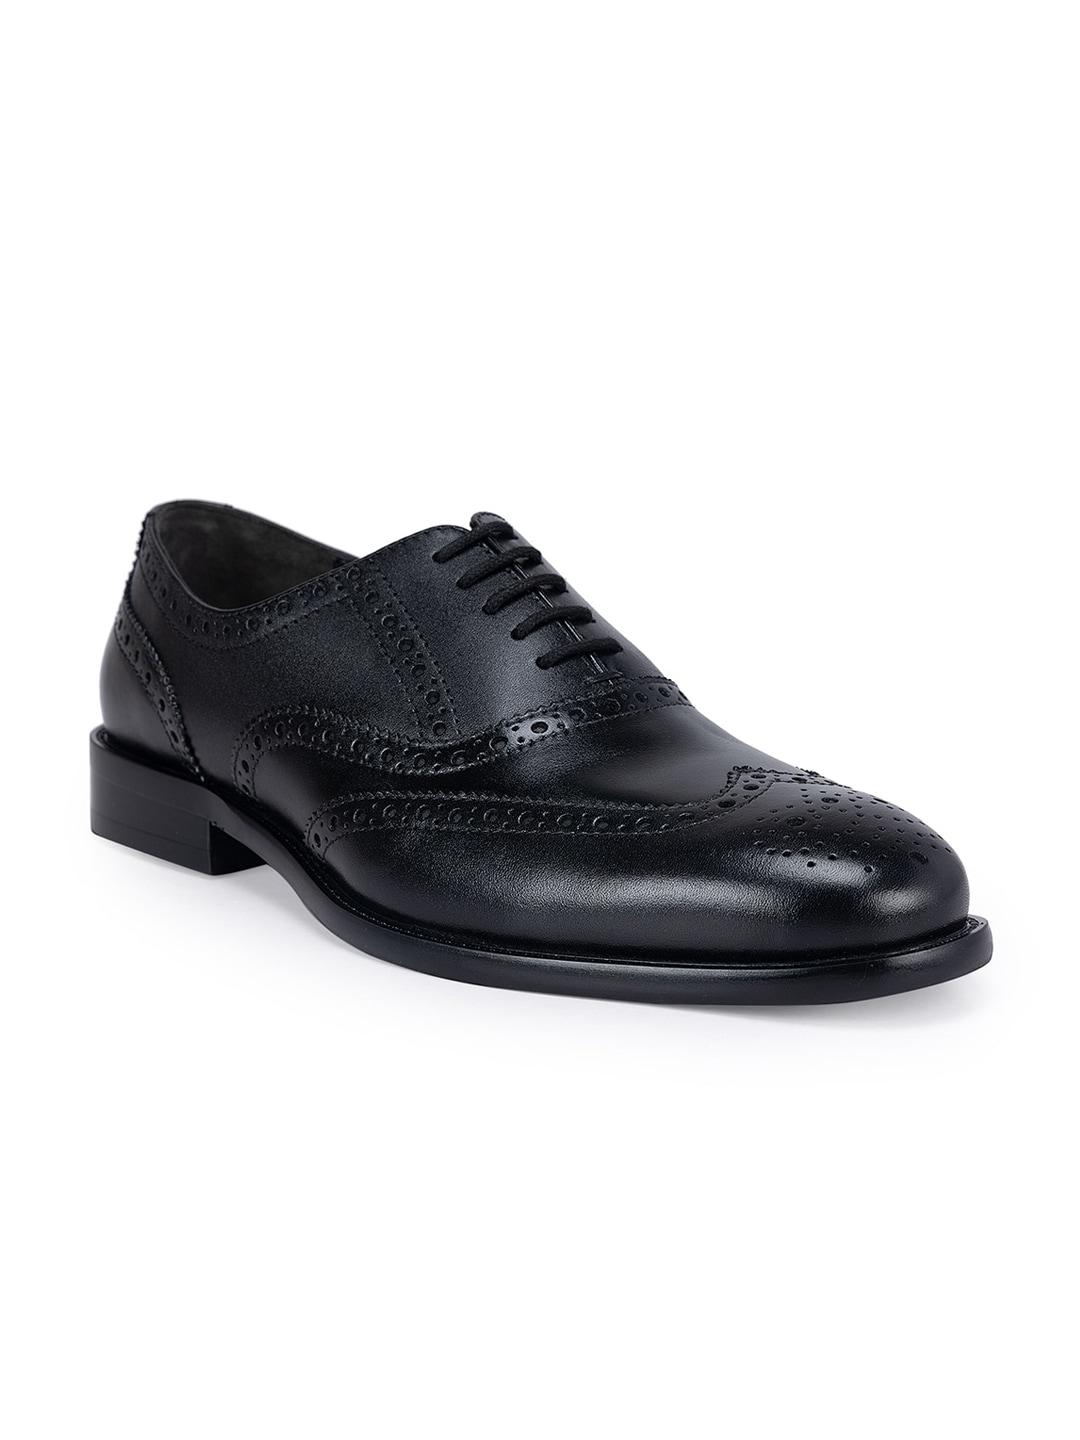 ROSSO BRUNELLO Men Textured Leather Formal Brogues